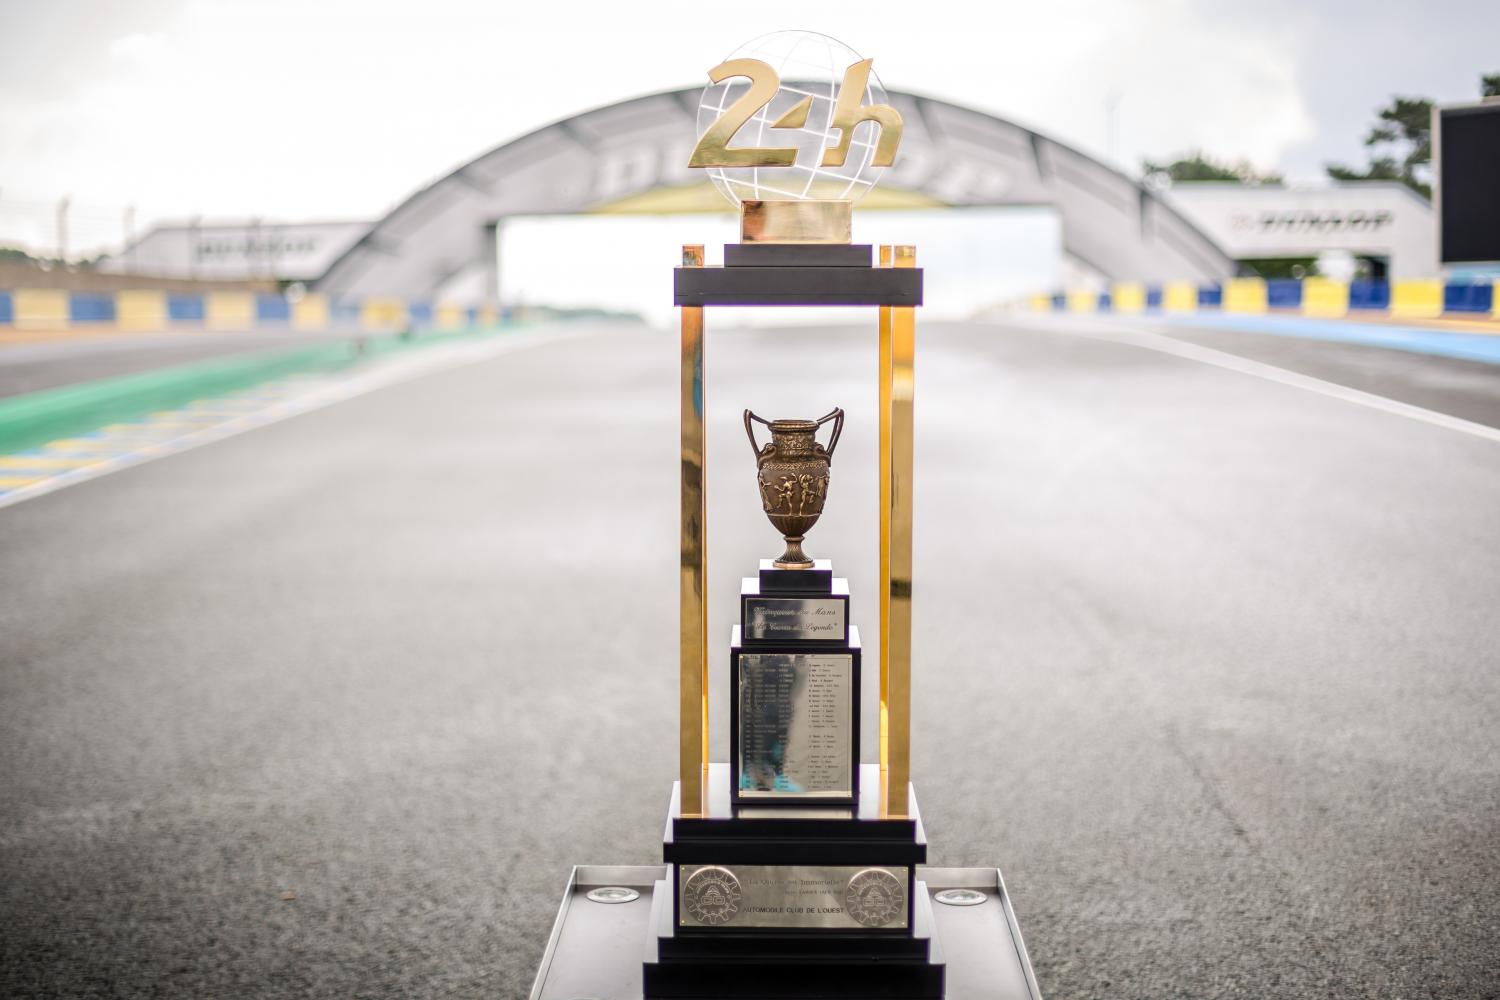 The 24 Hours of Le Mans winners' trophy has arrived at the Circuit